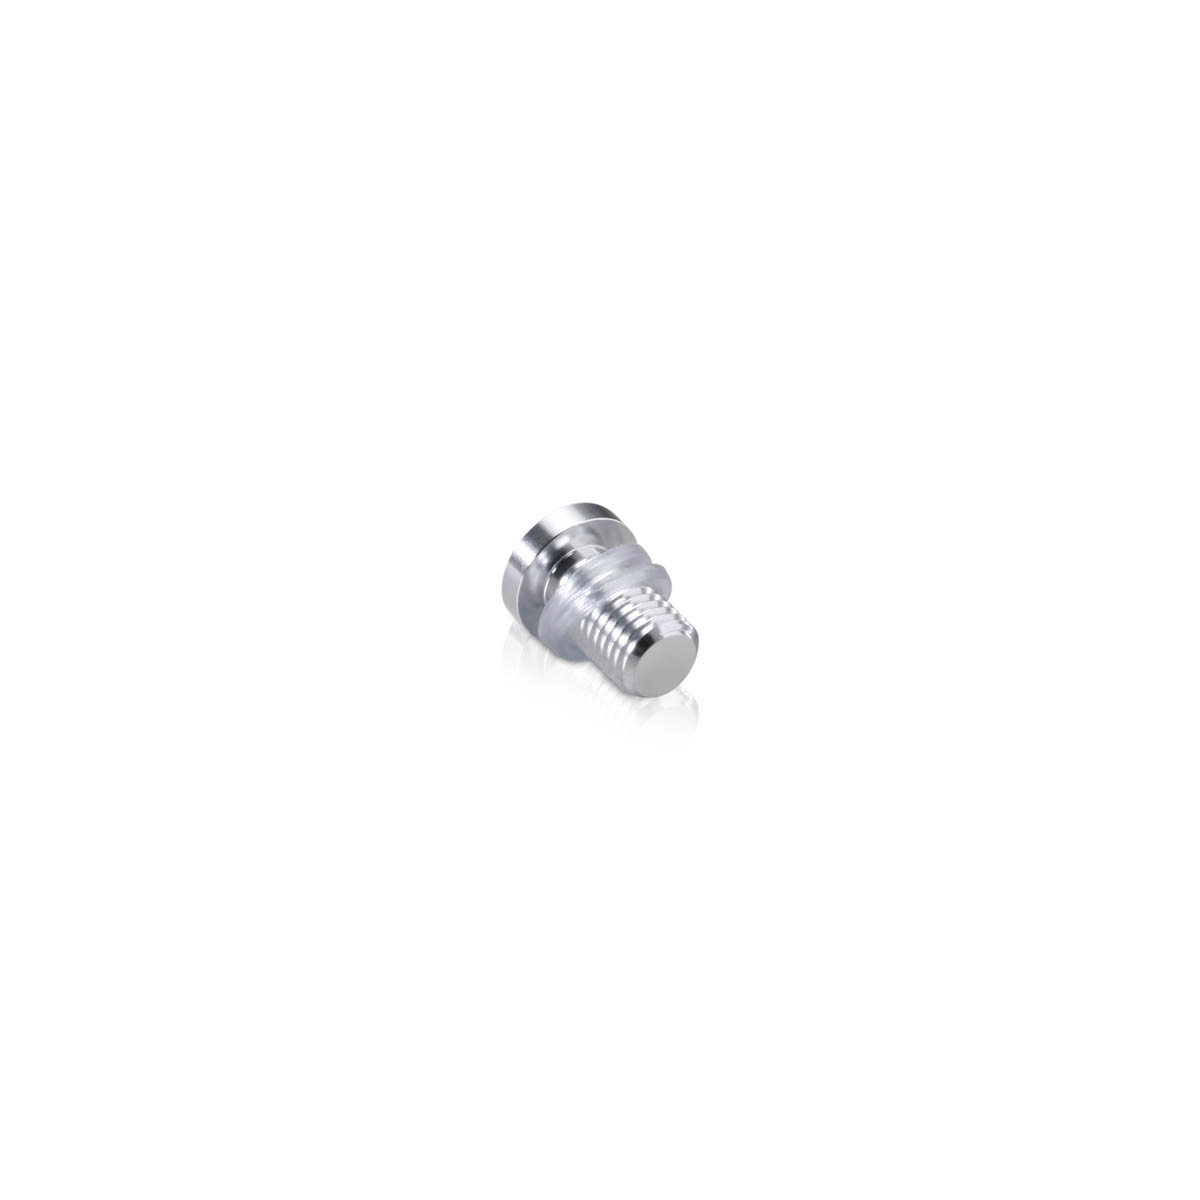 AL12-12AS Head replacement for Mbs-Standoffs 1/2'' Diameter x 1/2'' Barrel Length, Aluminum Clear Shiny Finish Standoffs (Includes 2 Silicone Washers).